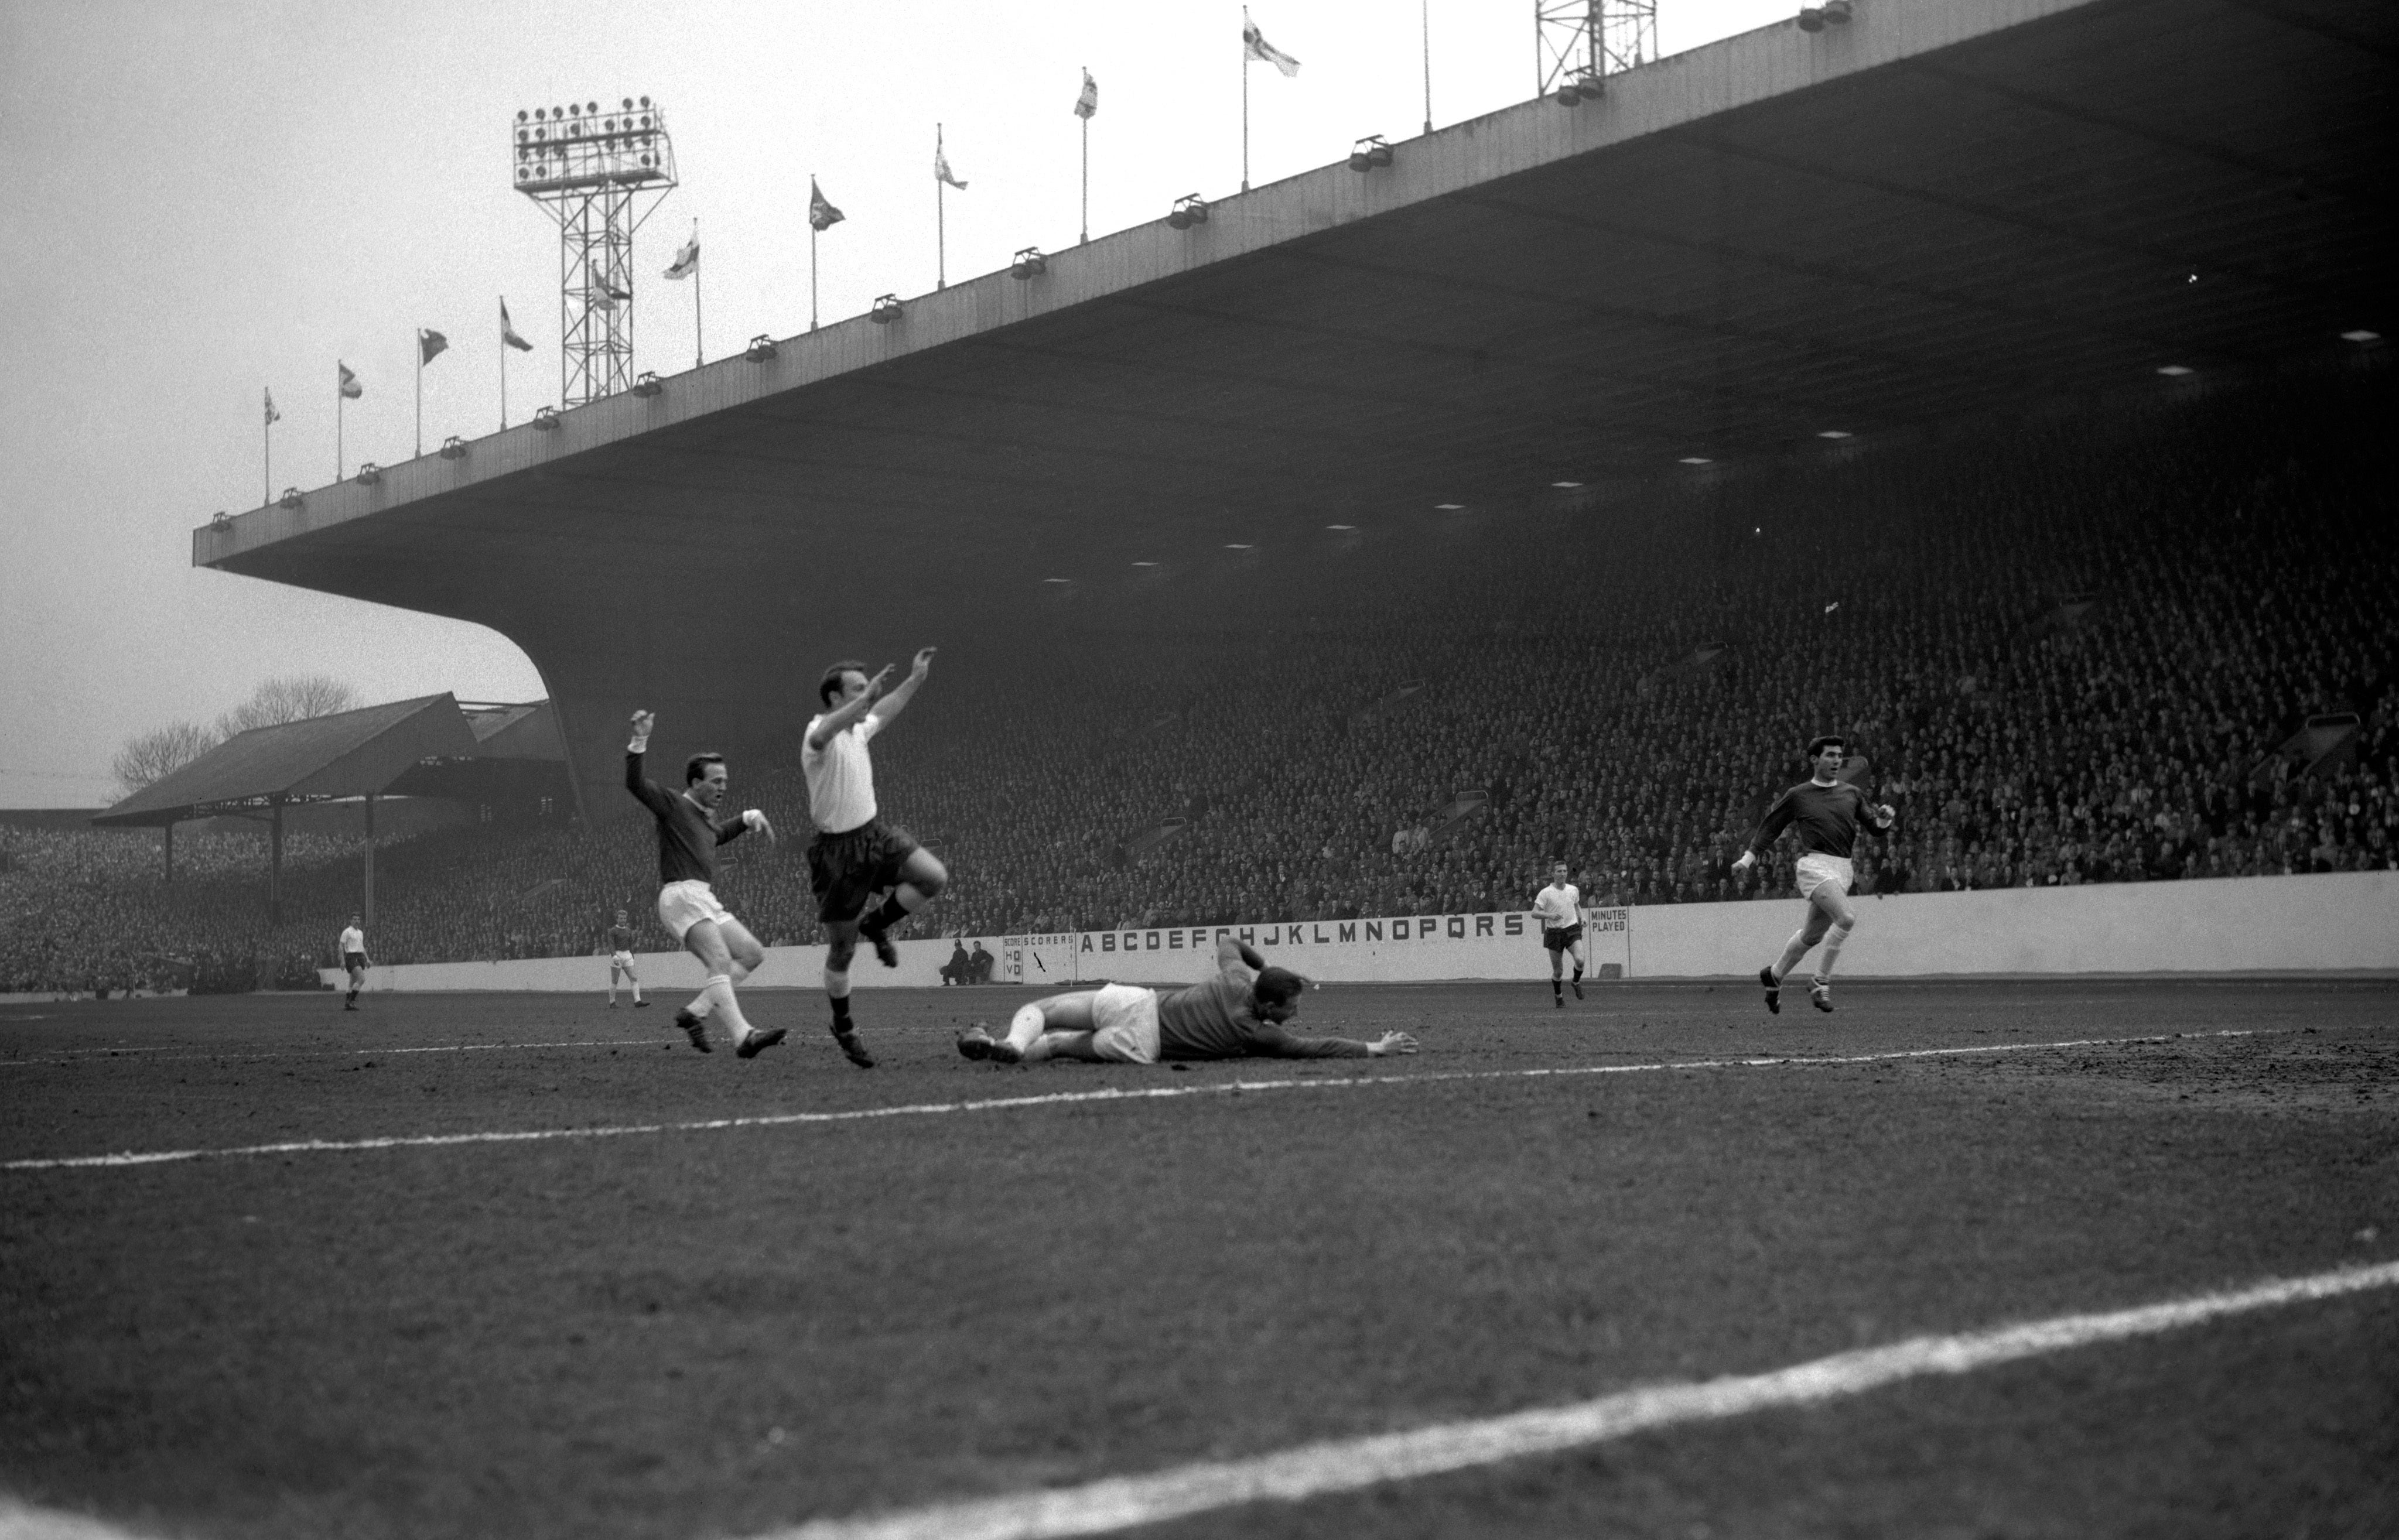 Jimmy Greaves scores in the 1962 FA Cup semi-final as Tottenham go on to win the cup (PA)